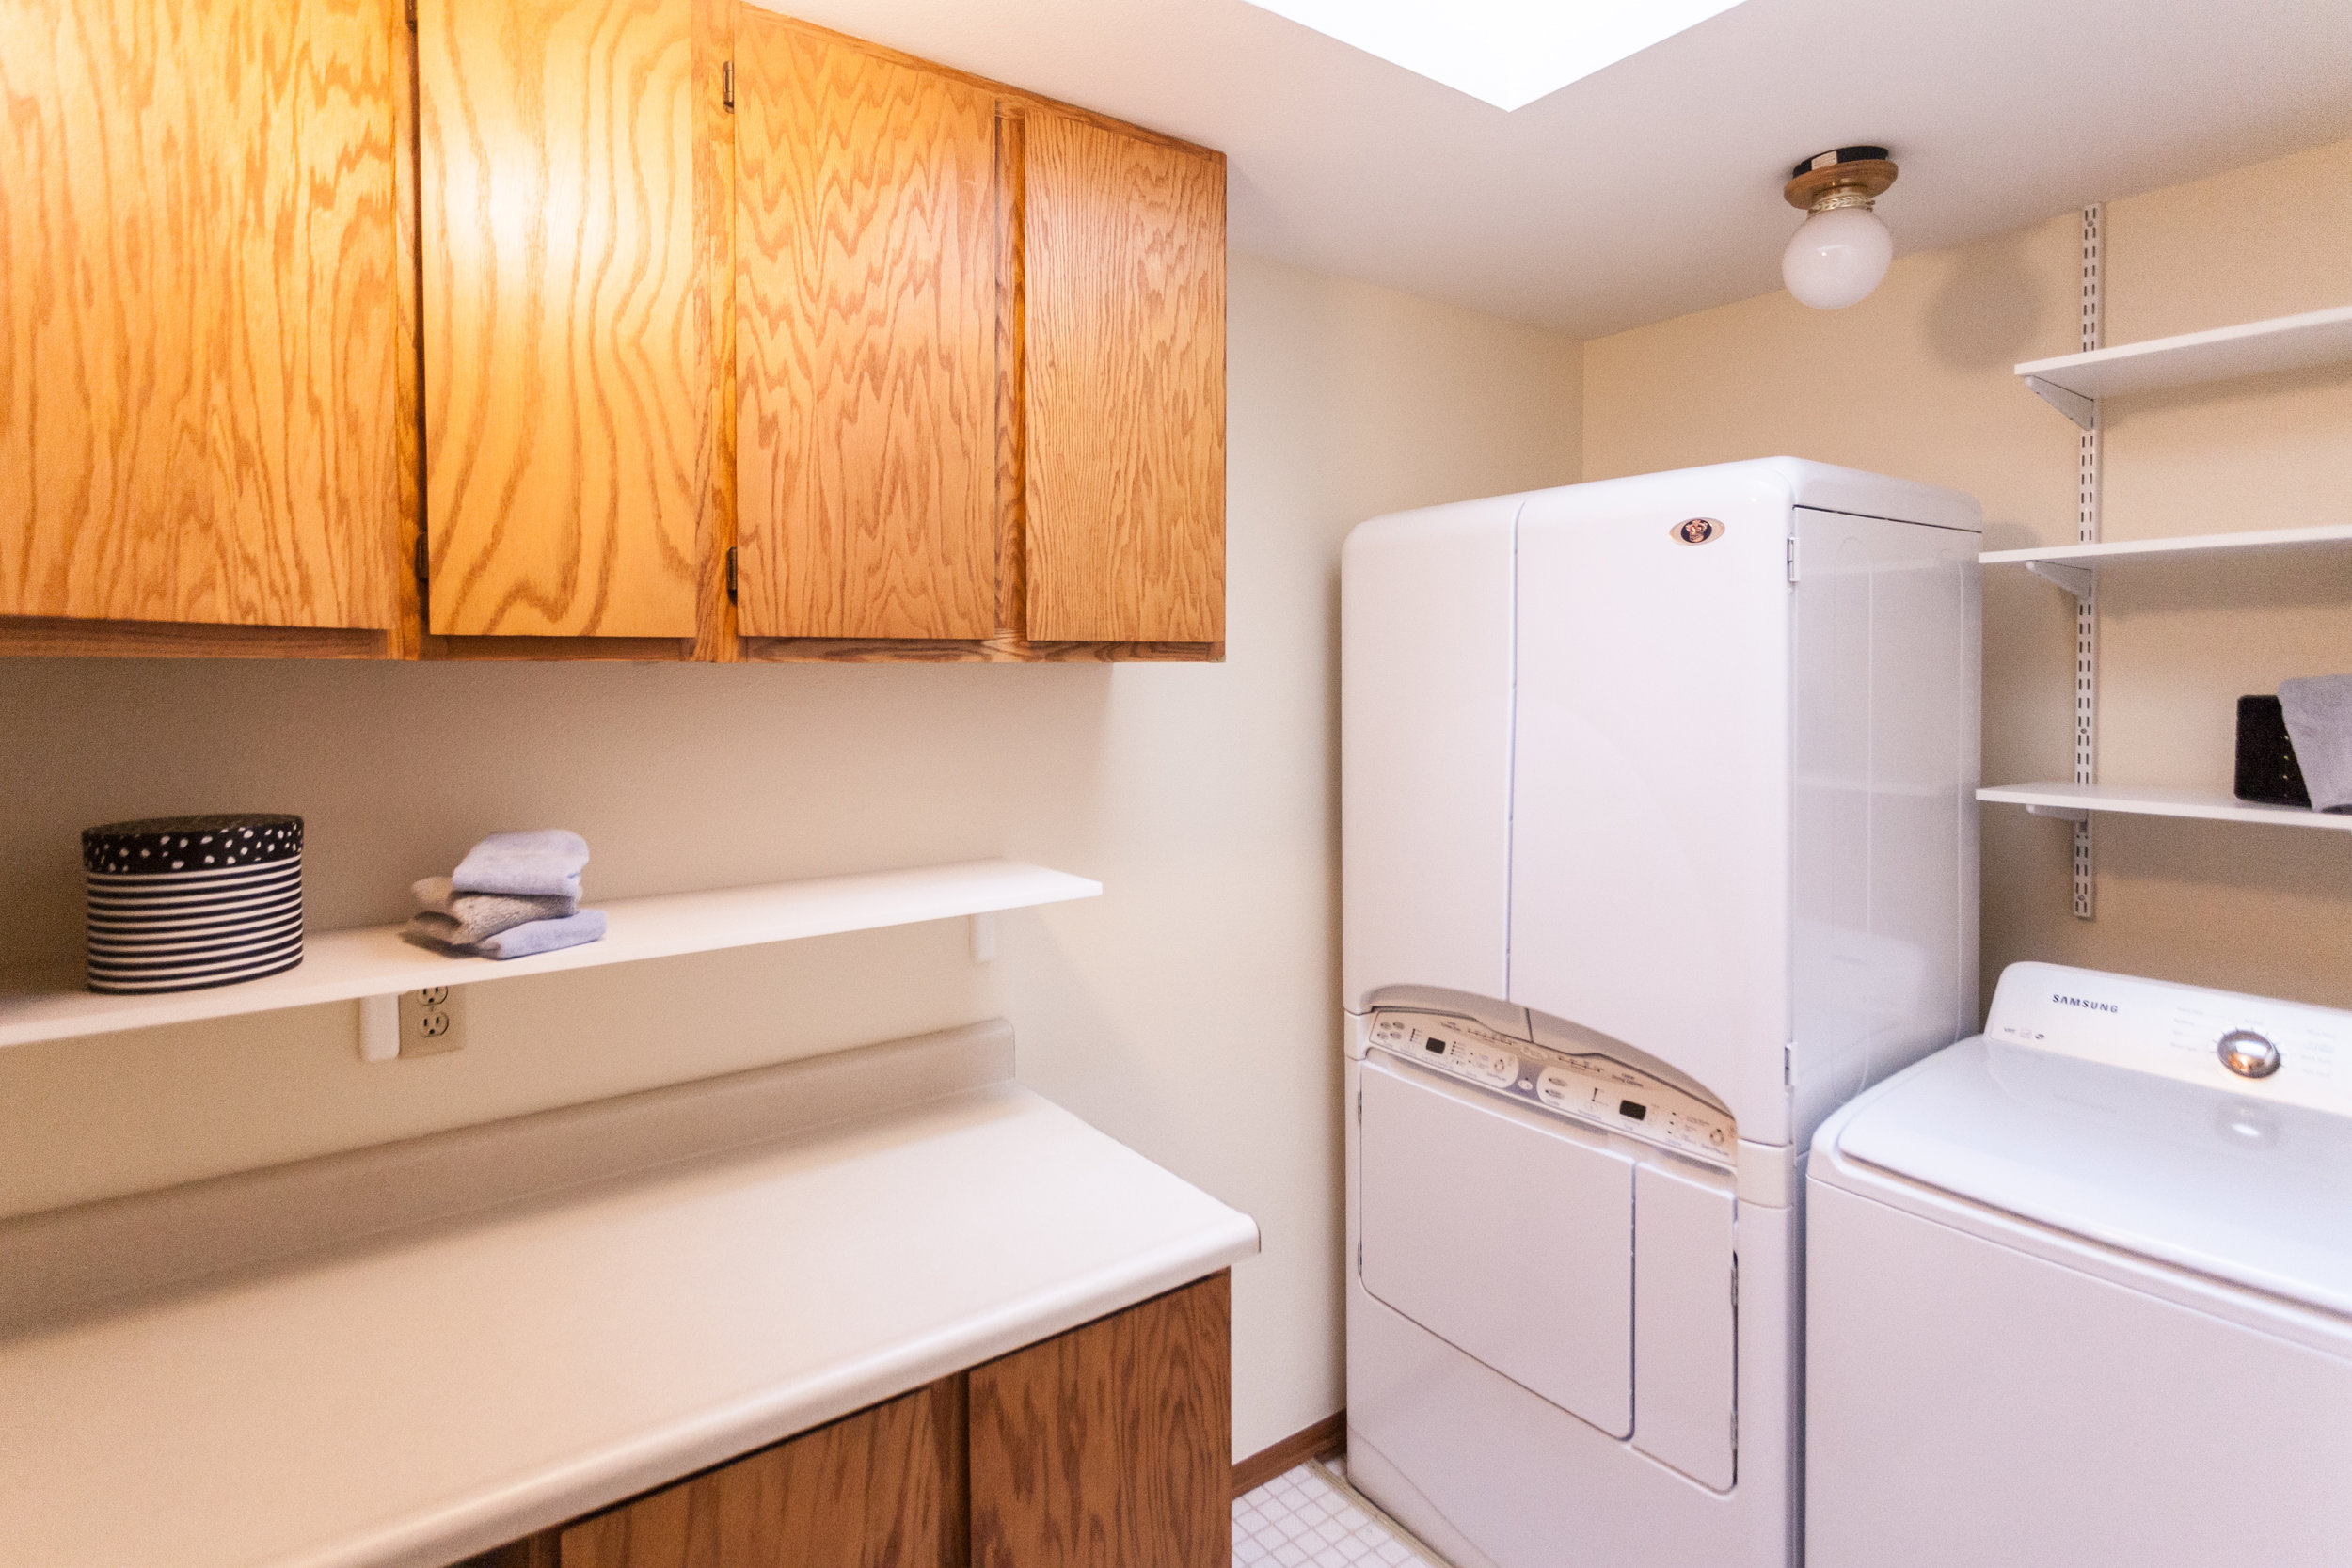  Dedicated laundry-room. Dryer with a stand-up dryer section is an extra bonus. Just outside the master-bedroom and the two additional bedrooms. No traipsing down to the basement for laundry. 3 bedrooms on the upper floor. 